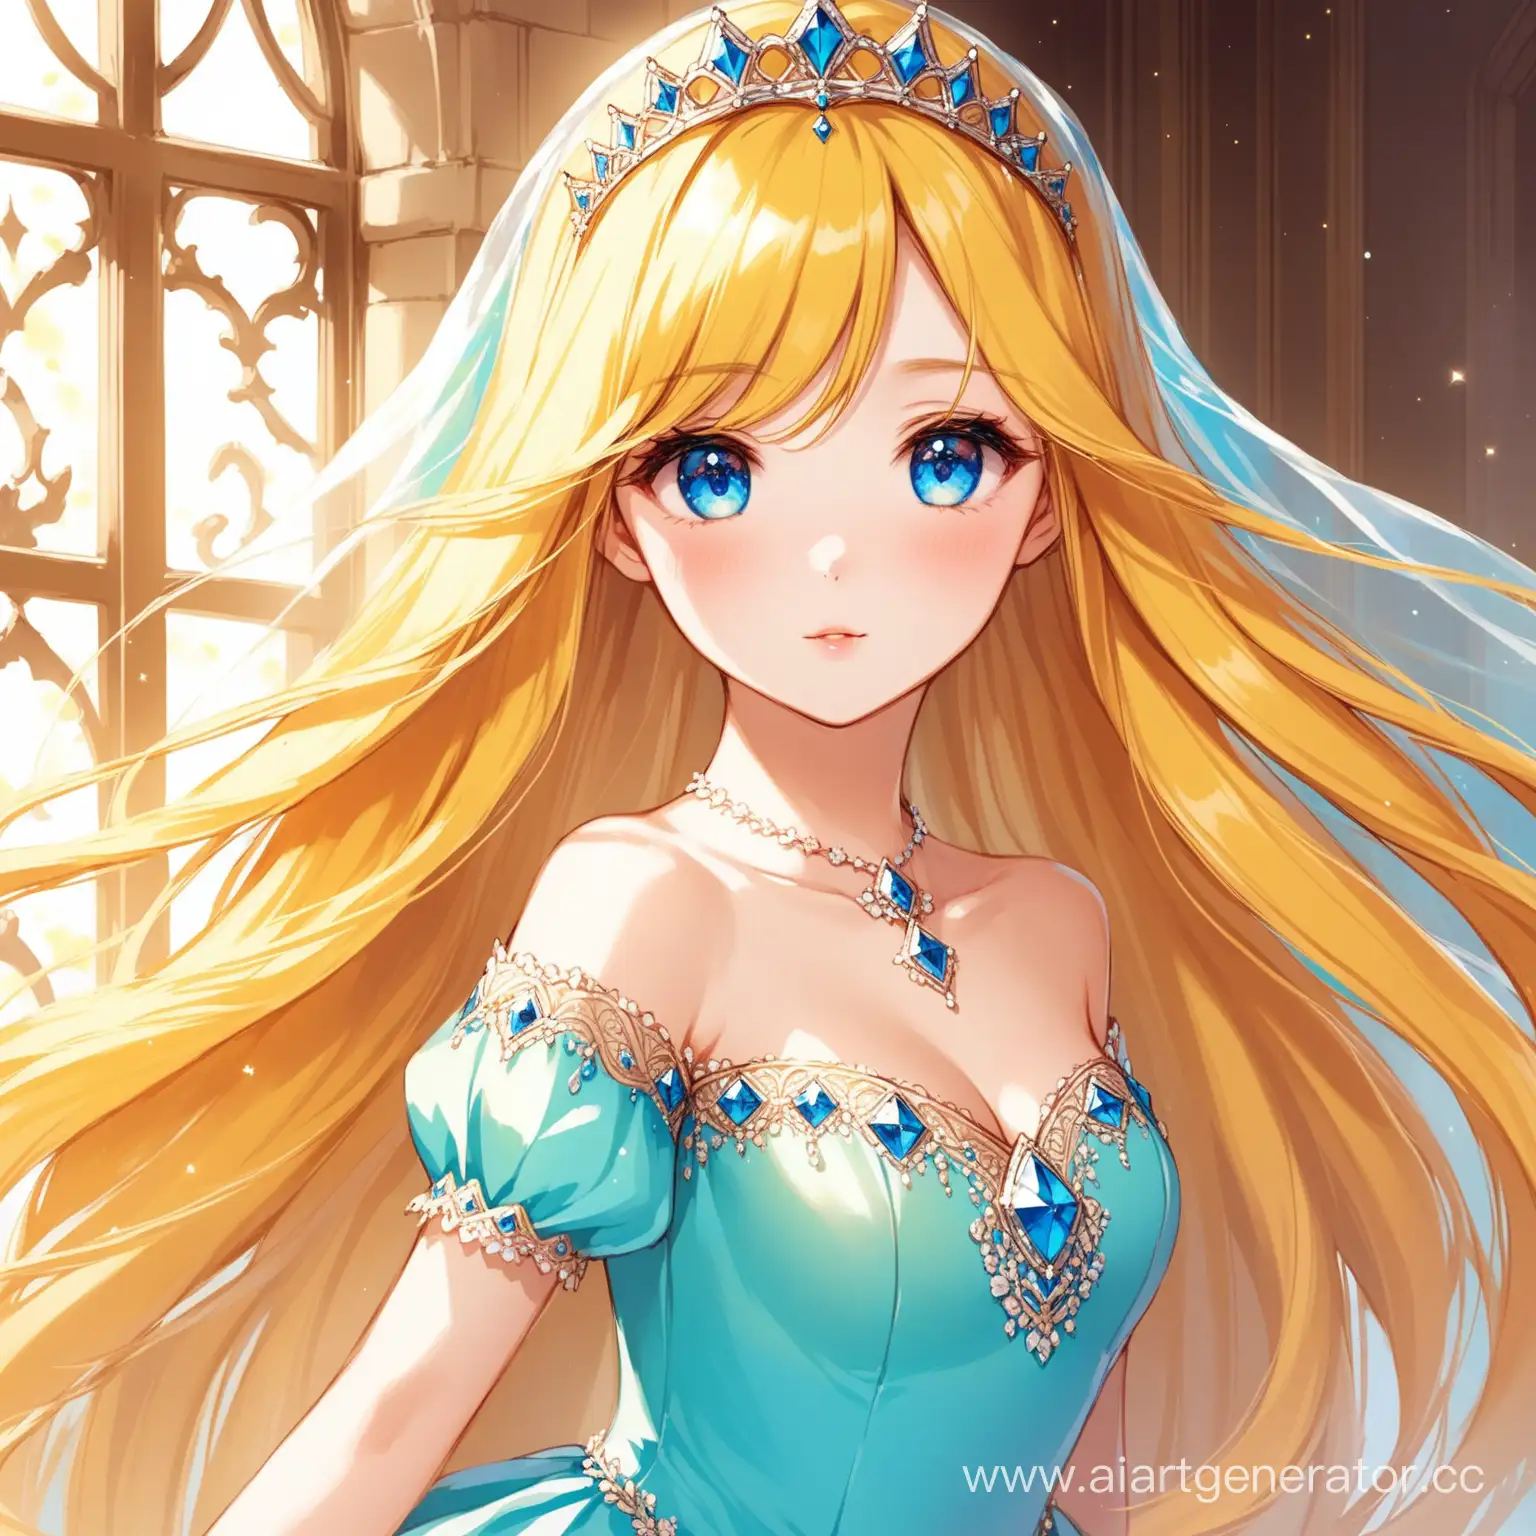 Beatiful girl. She is princess. She has yellow hair. Her eyes is blue. Her dress red. Her hair is long